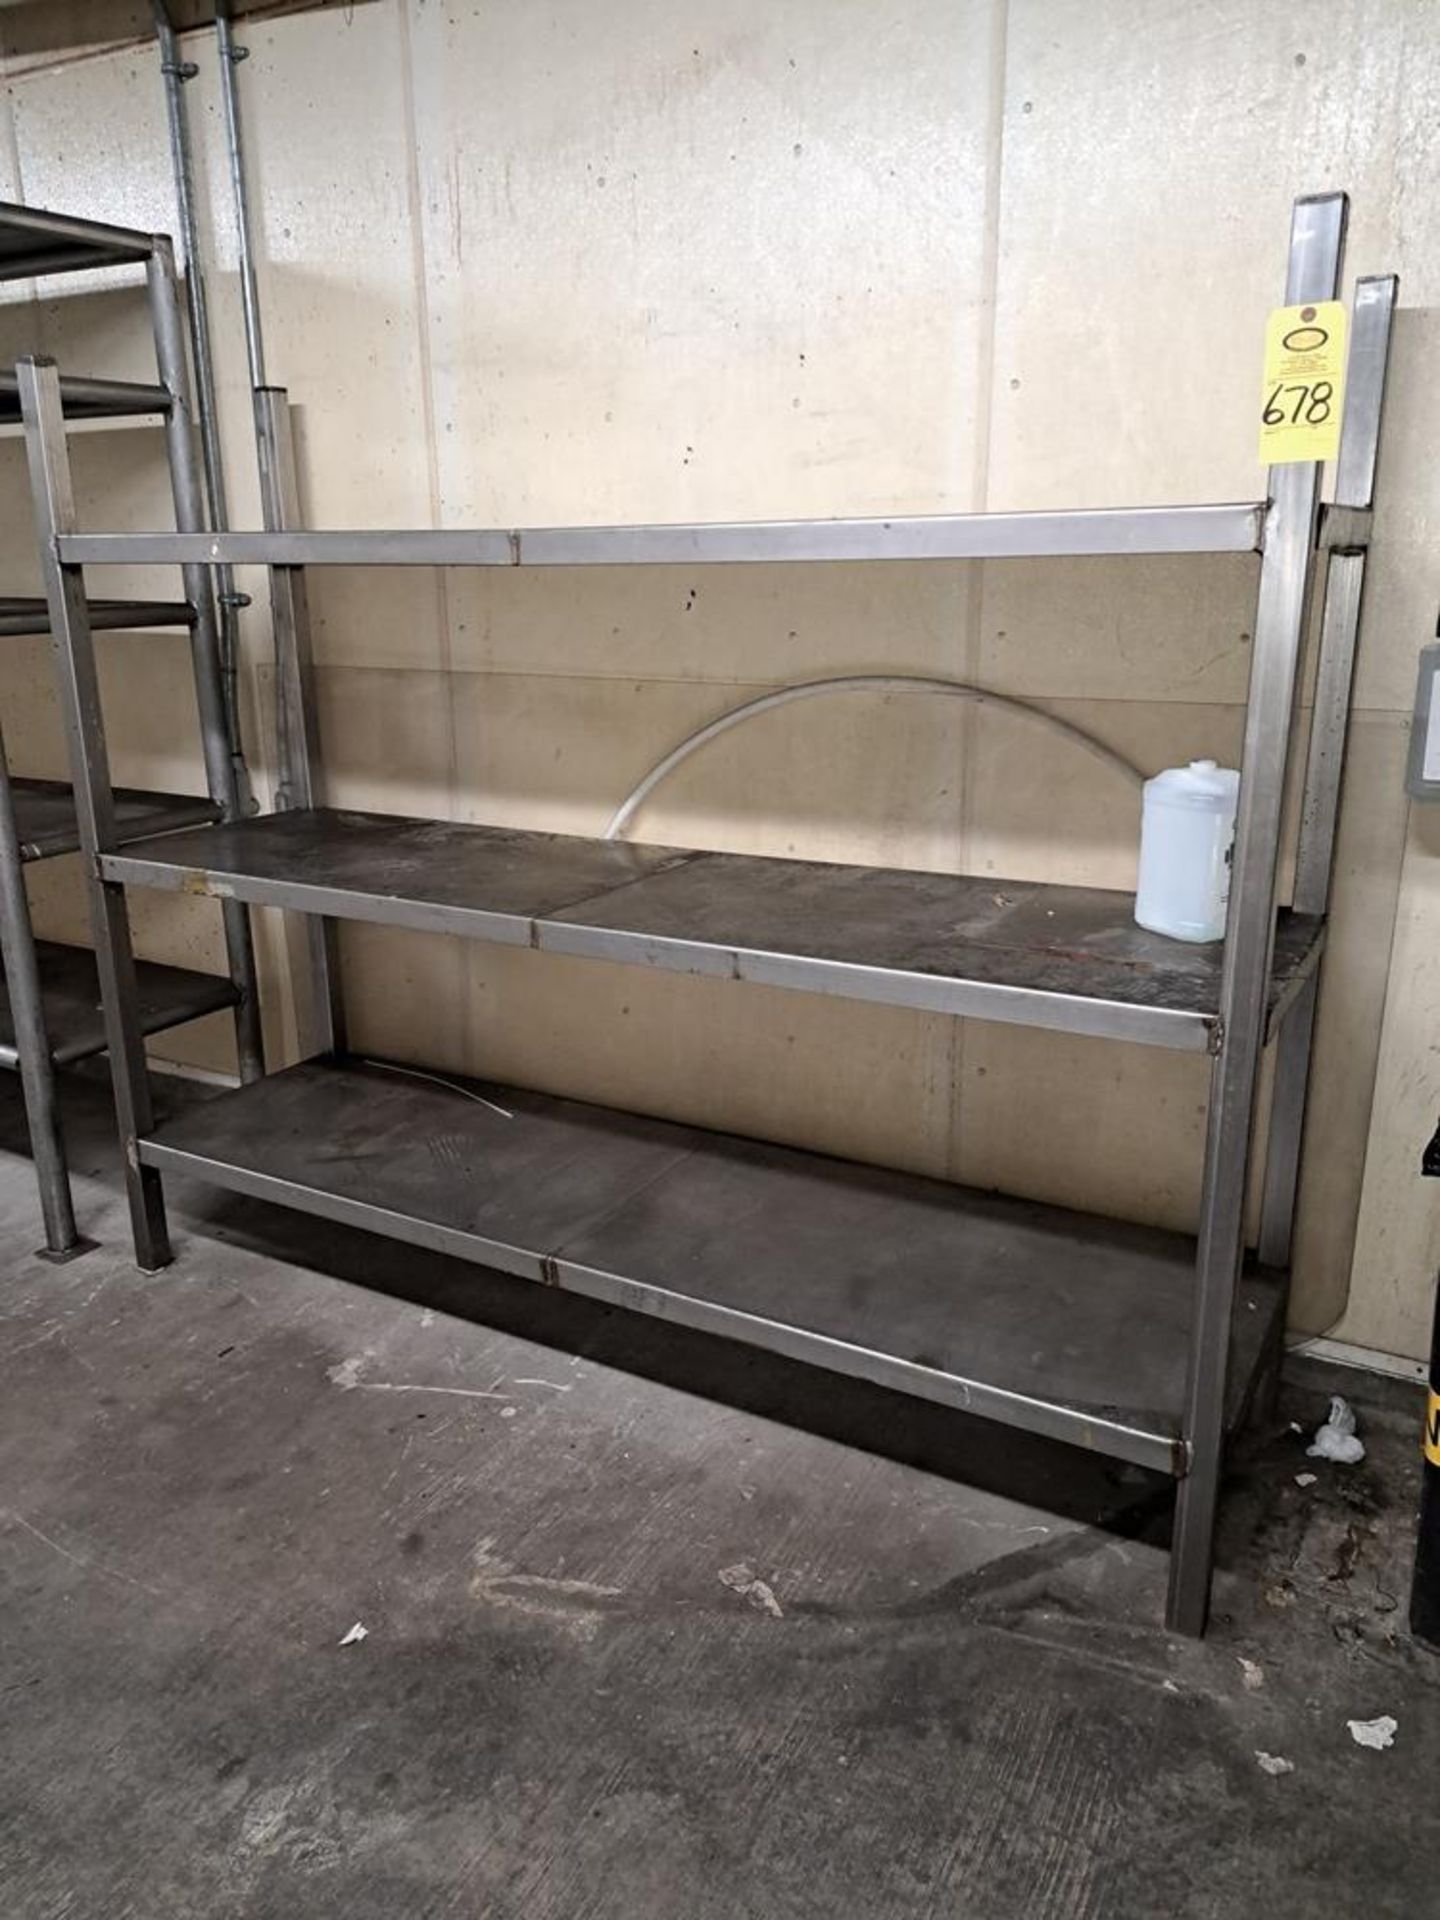 Stainless Steel Shelving Unit, 20" W X 7' L X 6' T: Required Loading Fee $50.00, Rigger-Norm